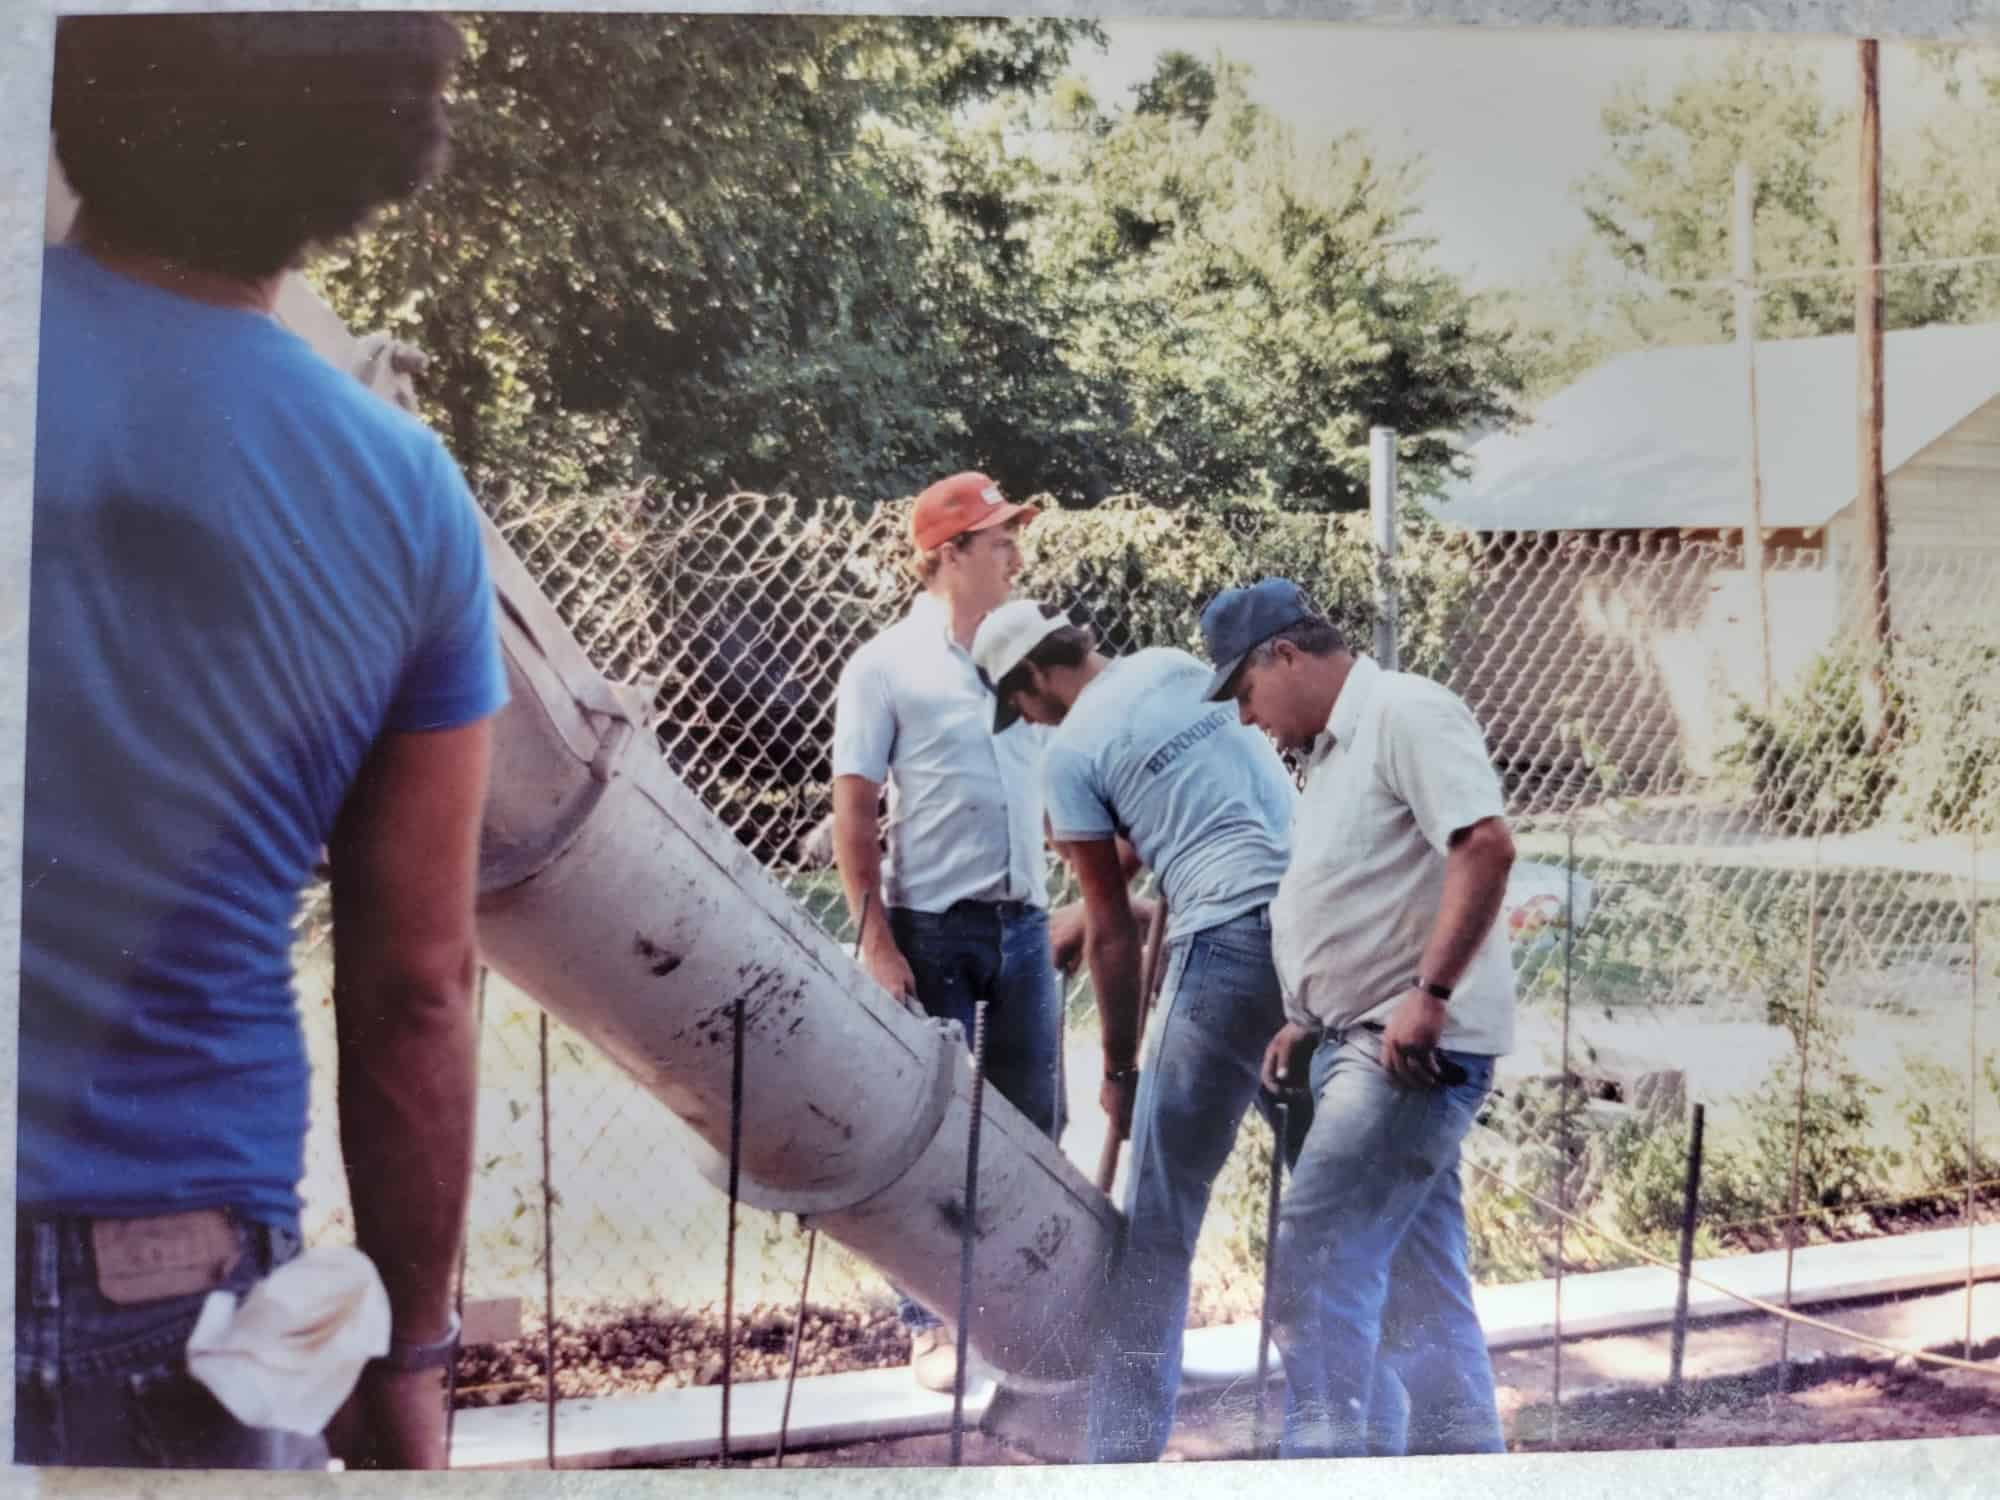 "I knew how to operate a backhoe before I drove a car," says Troy (pictured in the red hat). "I didn’t think it was that exciting back then. I just thought it was normal."